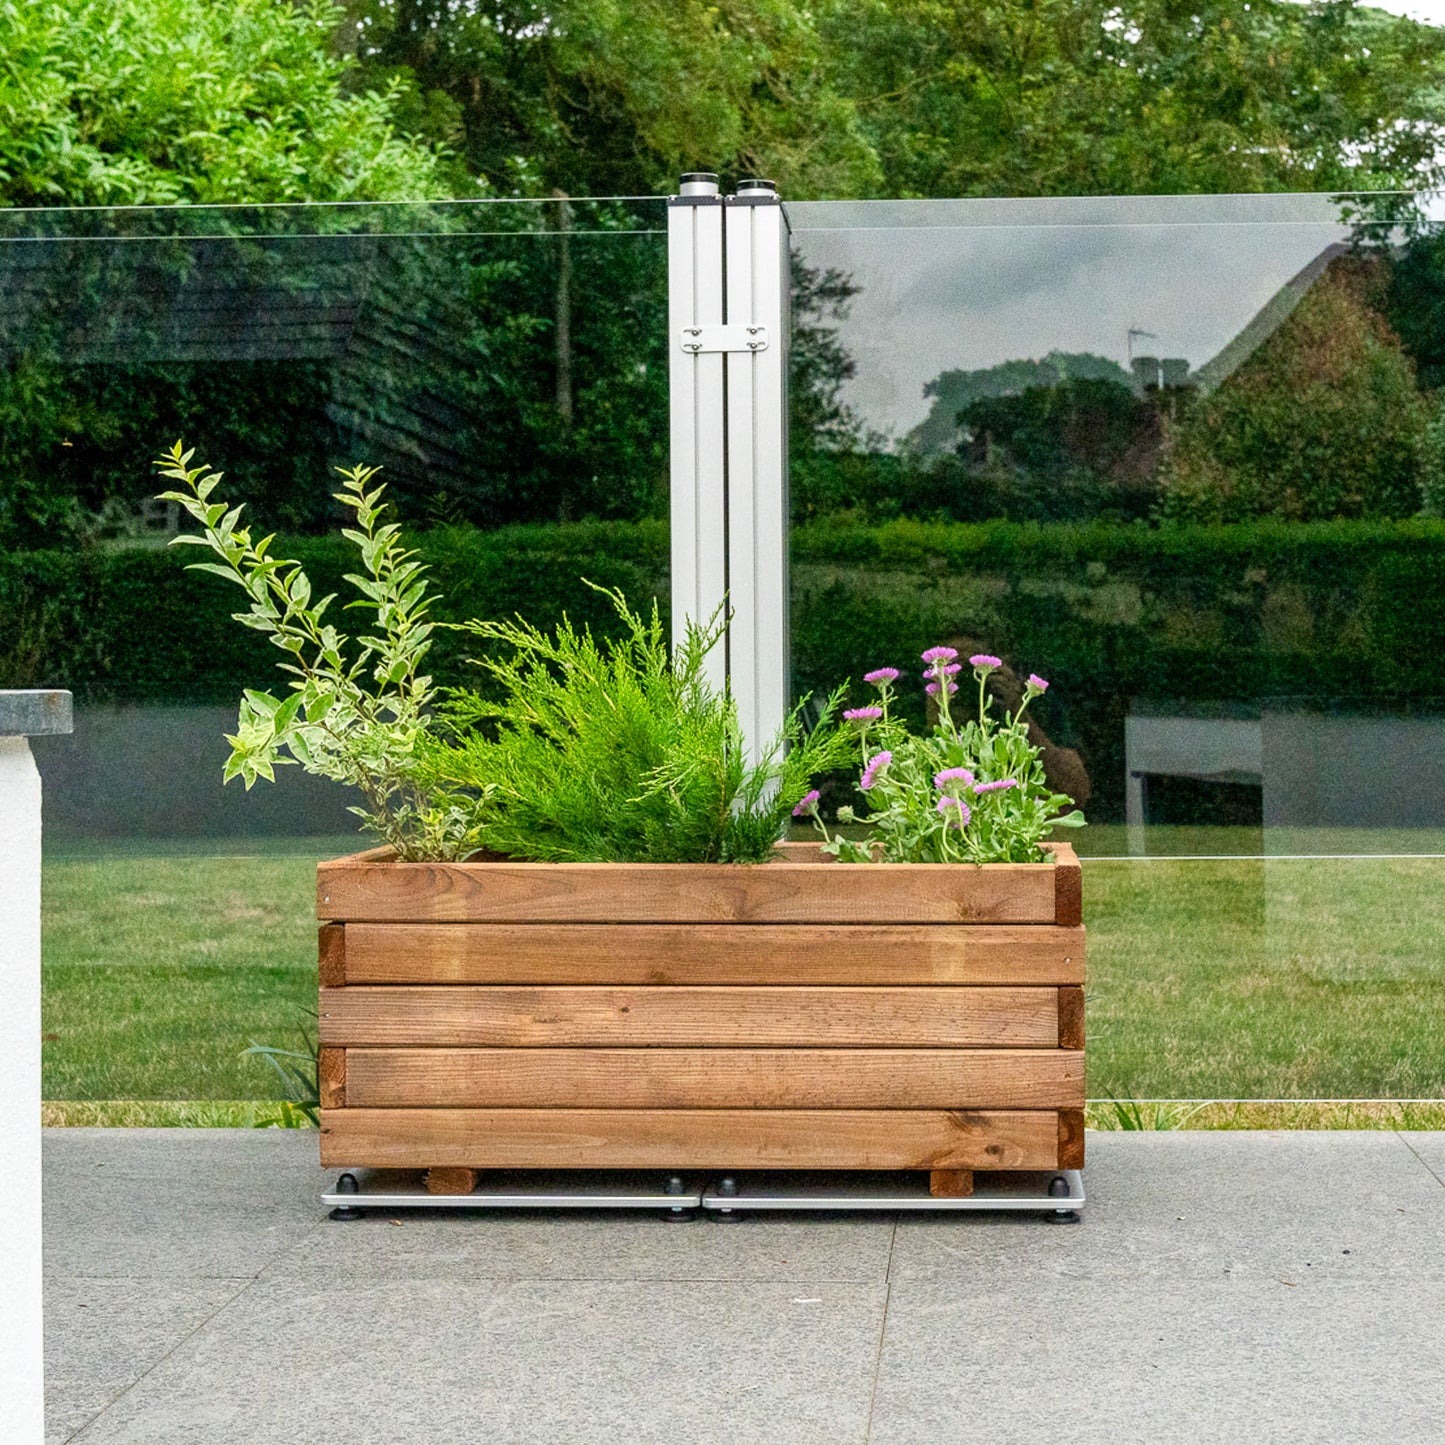 A wooden planter sat on the foot of a grey tinted glass windbreaker